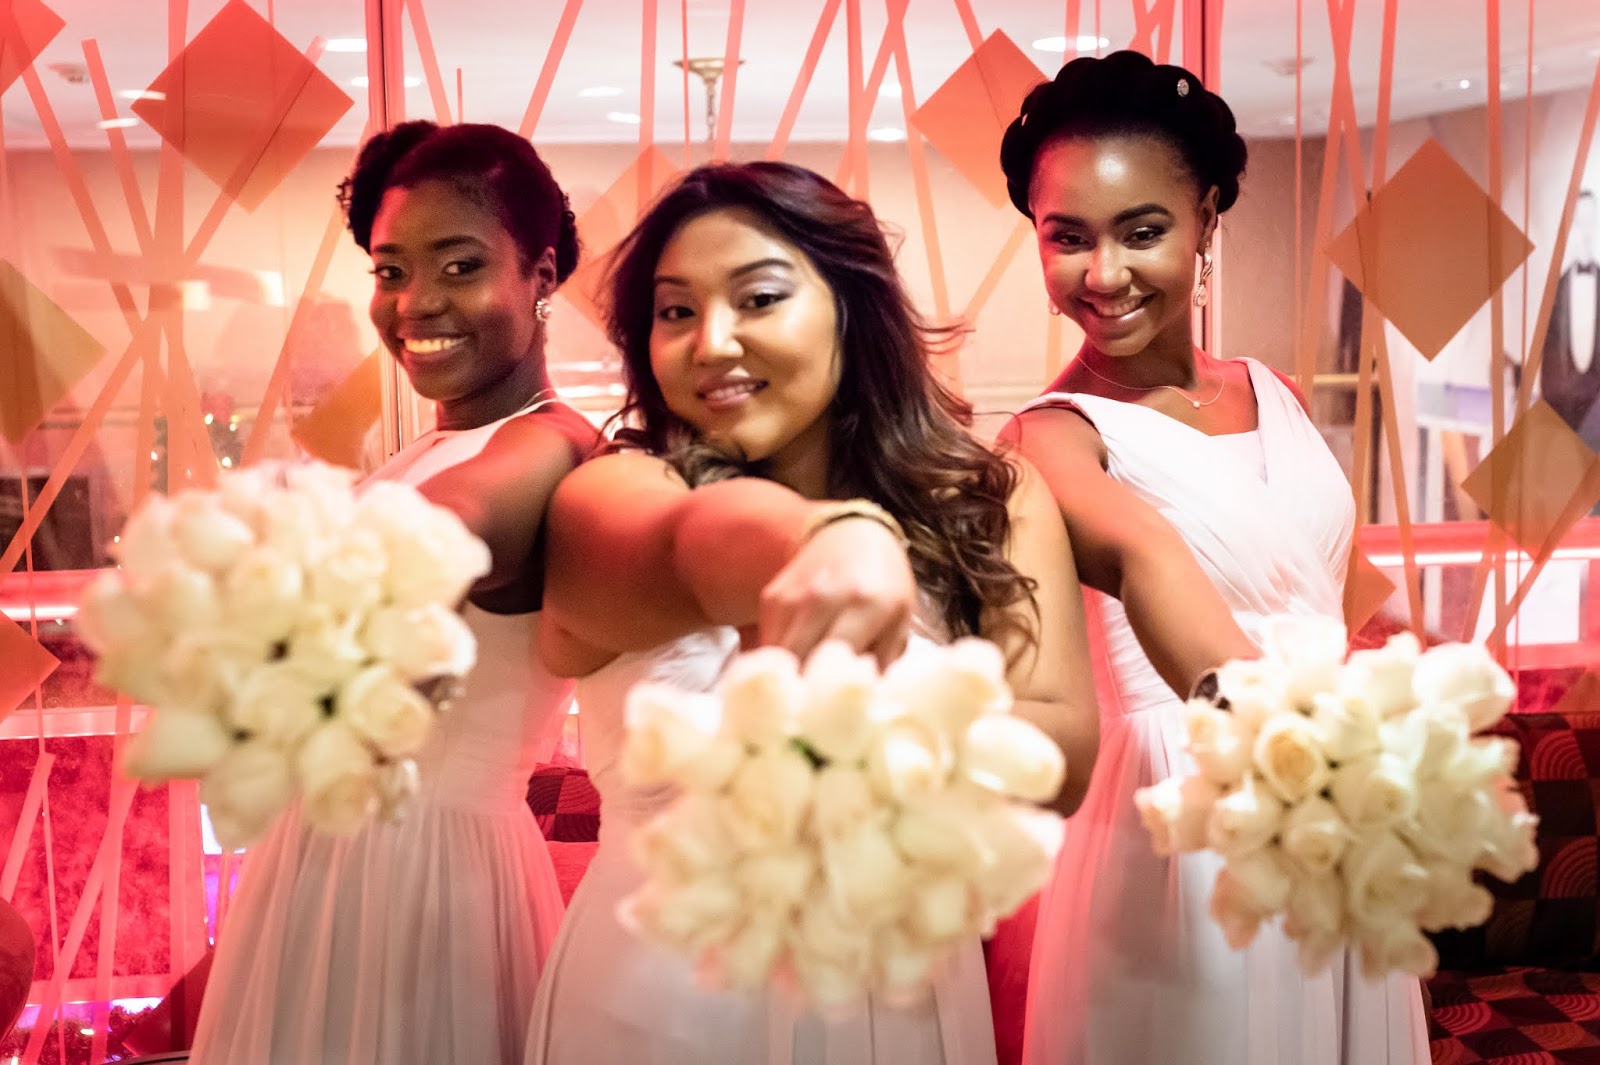 Beautiful Maids Of The Bride Displaying Colorful Flowers.